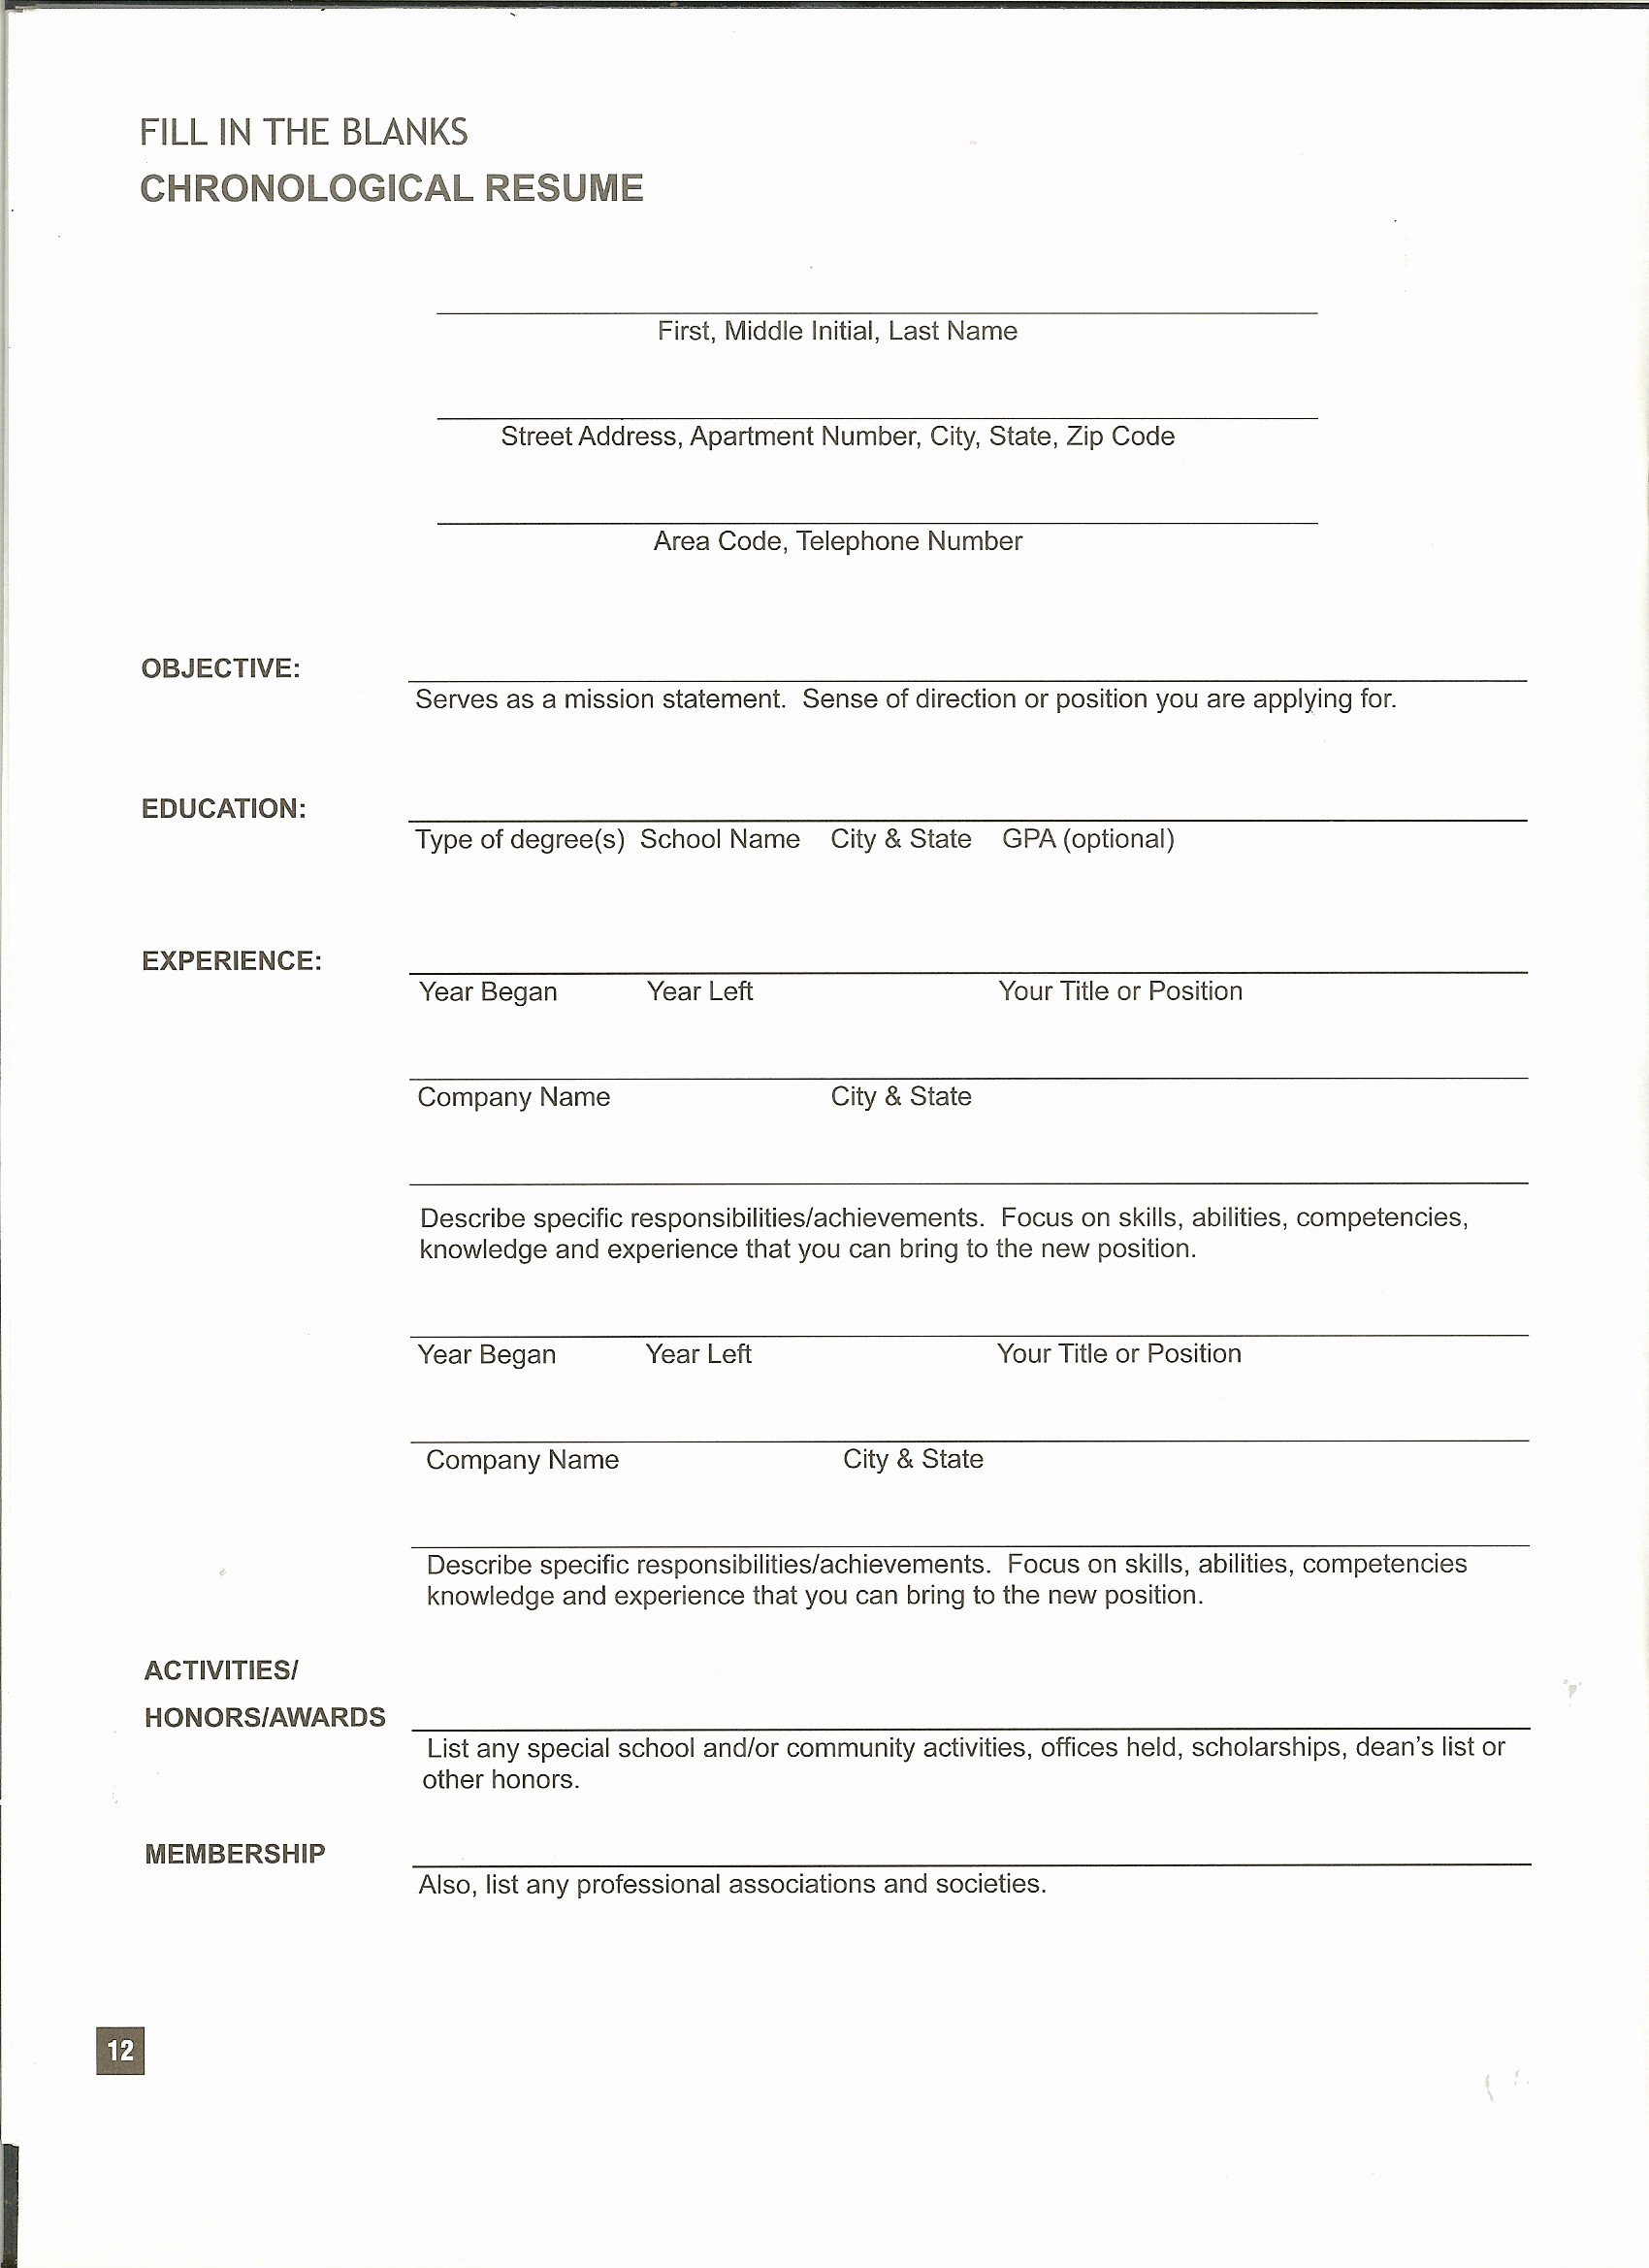 Form Of Resume for Job Beautiful Personal Data form Template Excel 1000 Images About